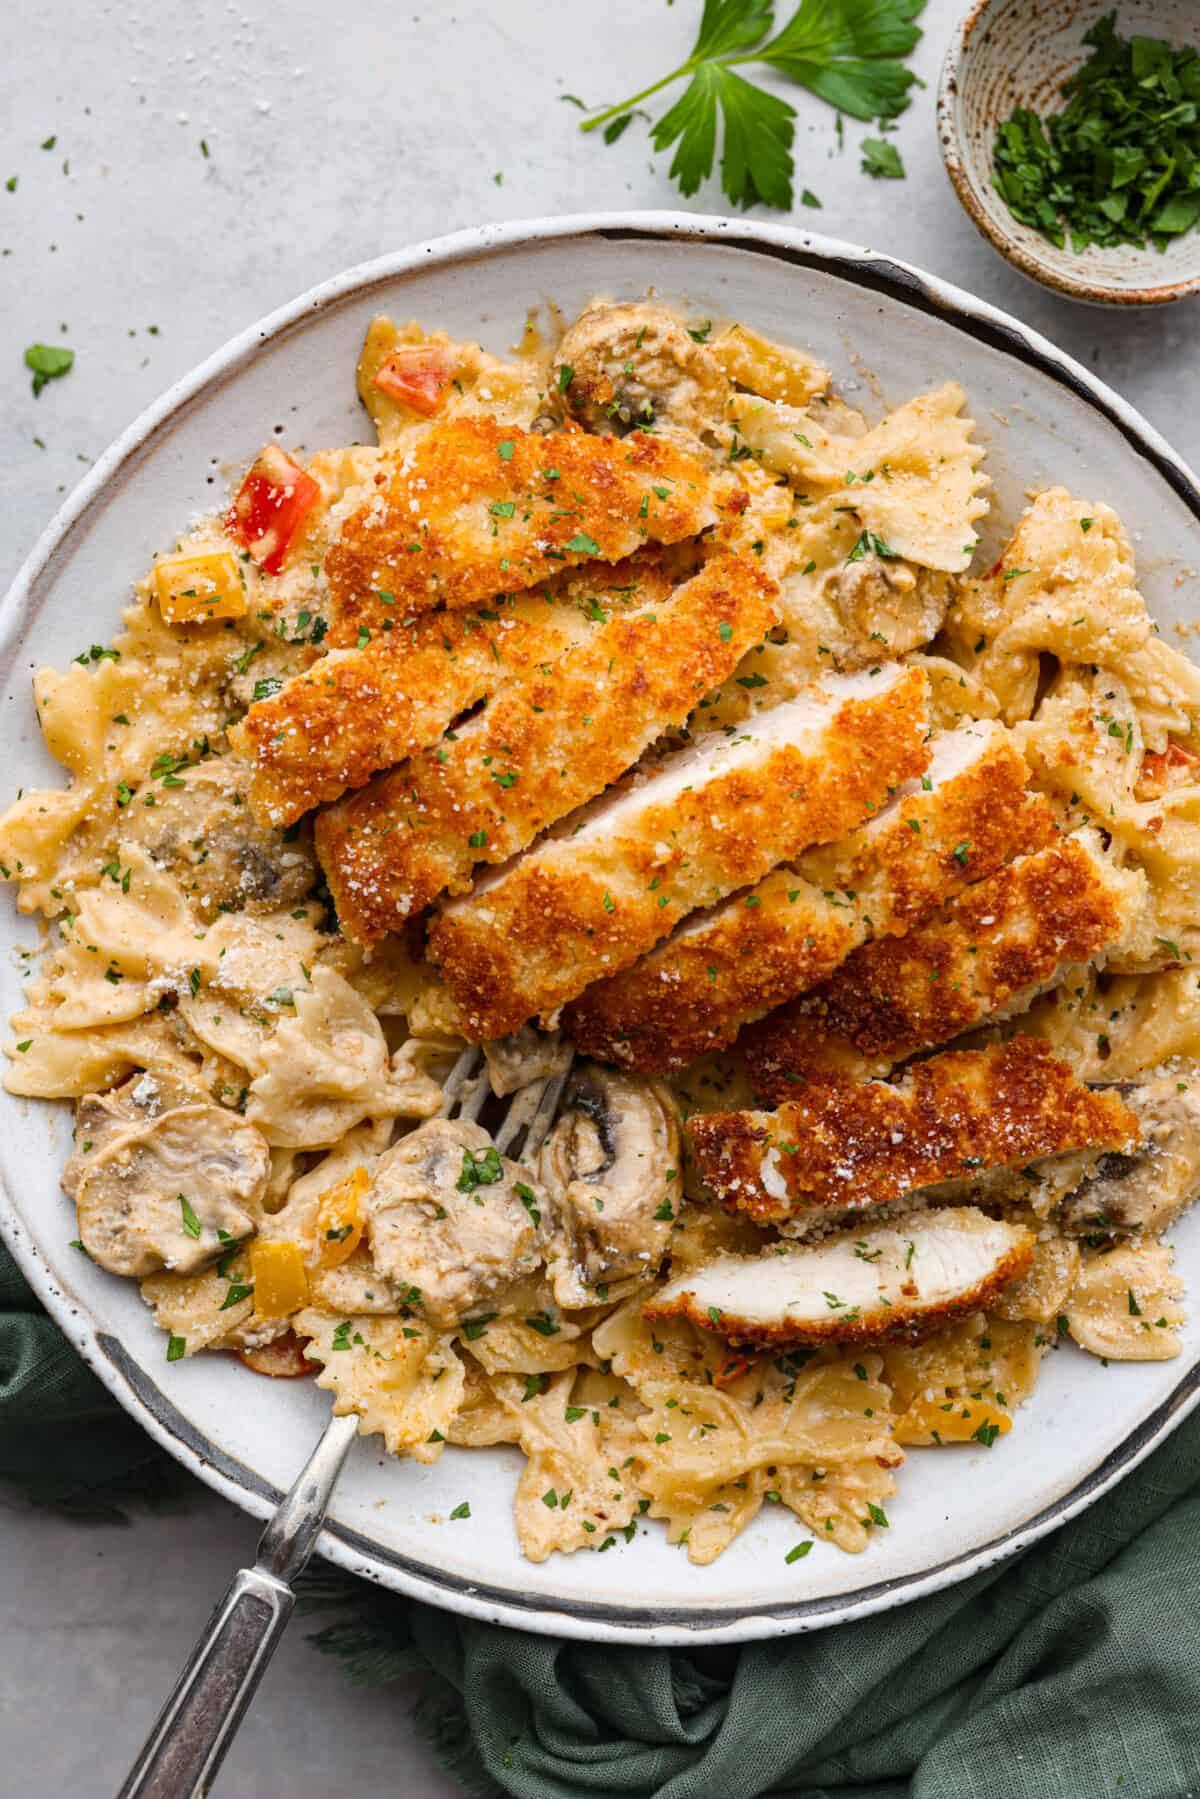 Sliced, breaded chicken served over bow tie pasta with a creamy Cajun sauce.